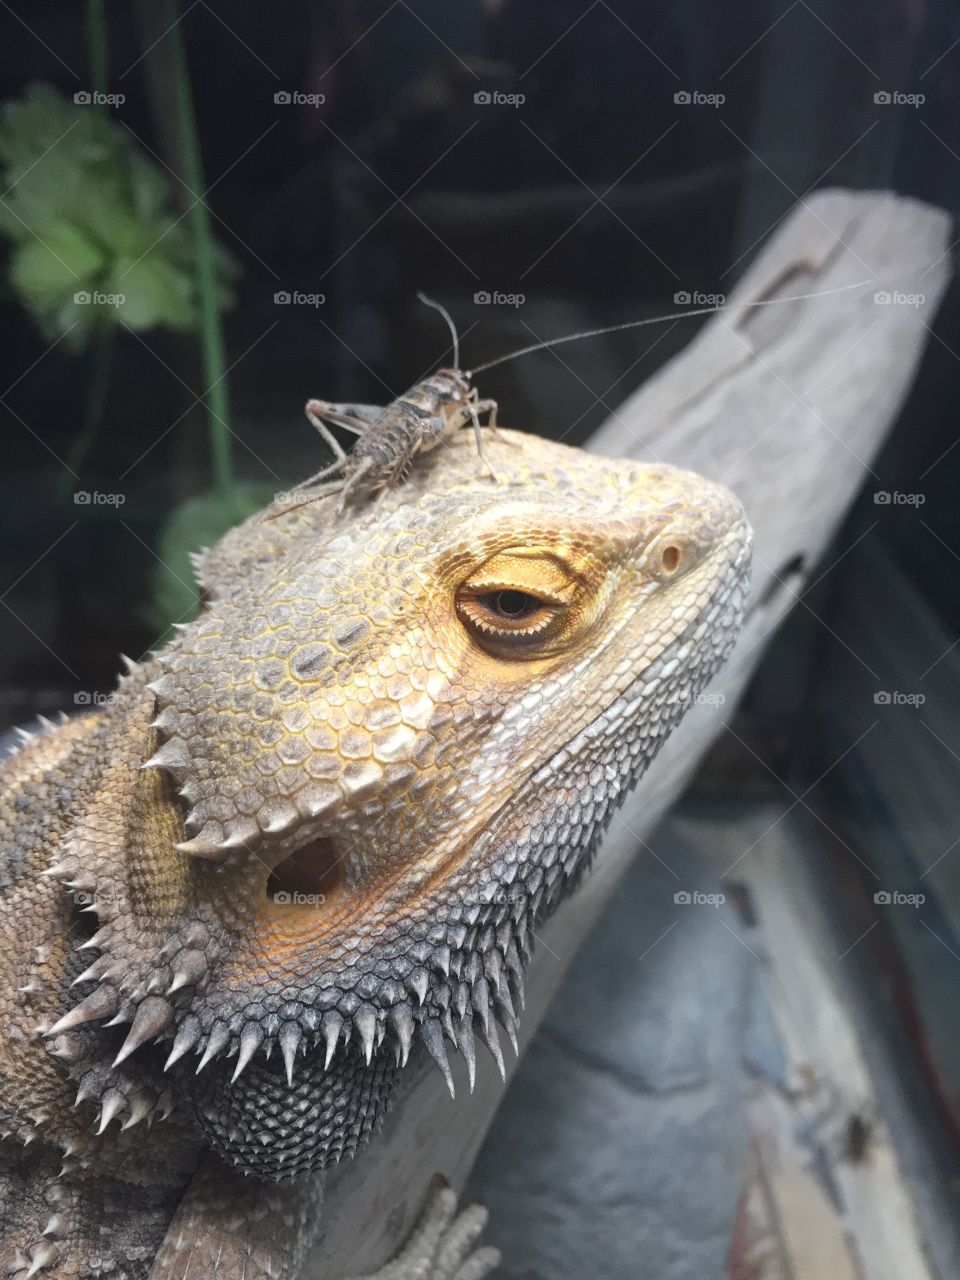 My Bearded Dragon Is so annoyed that his food is avoiding him by sitting where he can’t catch him; on the top of his head! Crickets are smart!